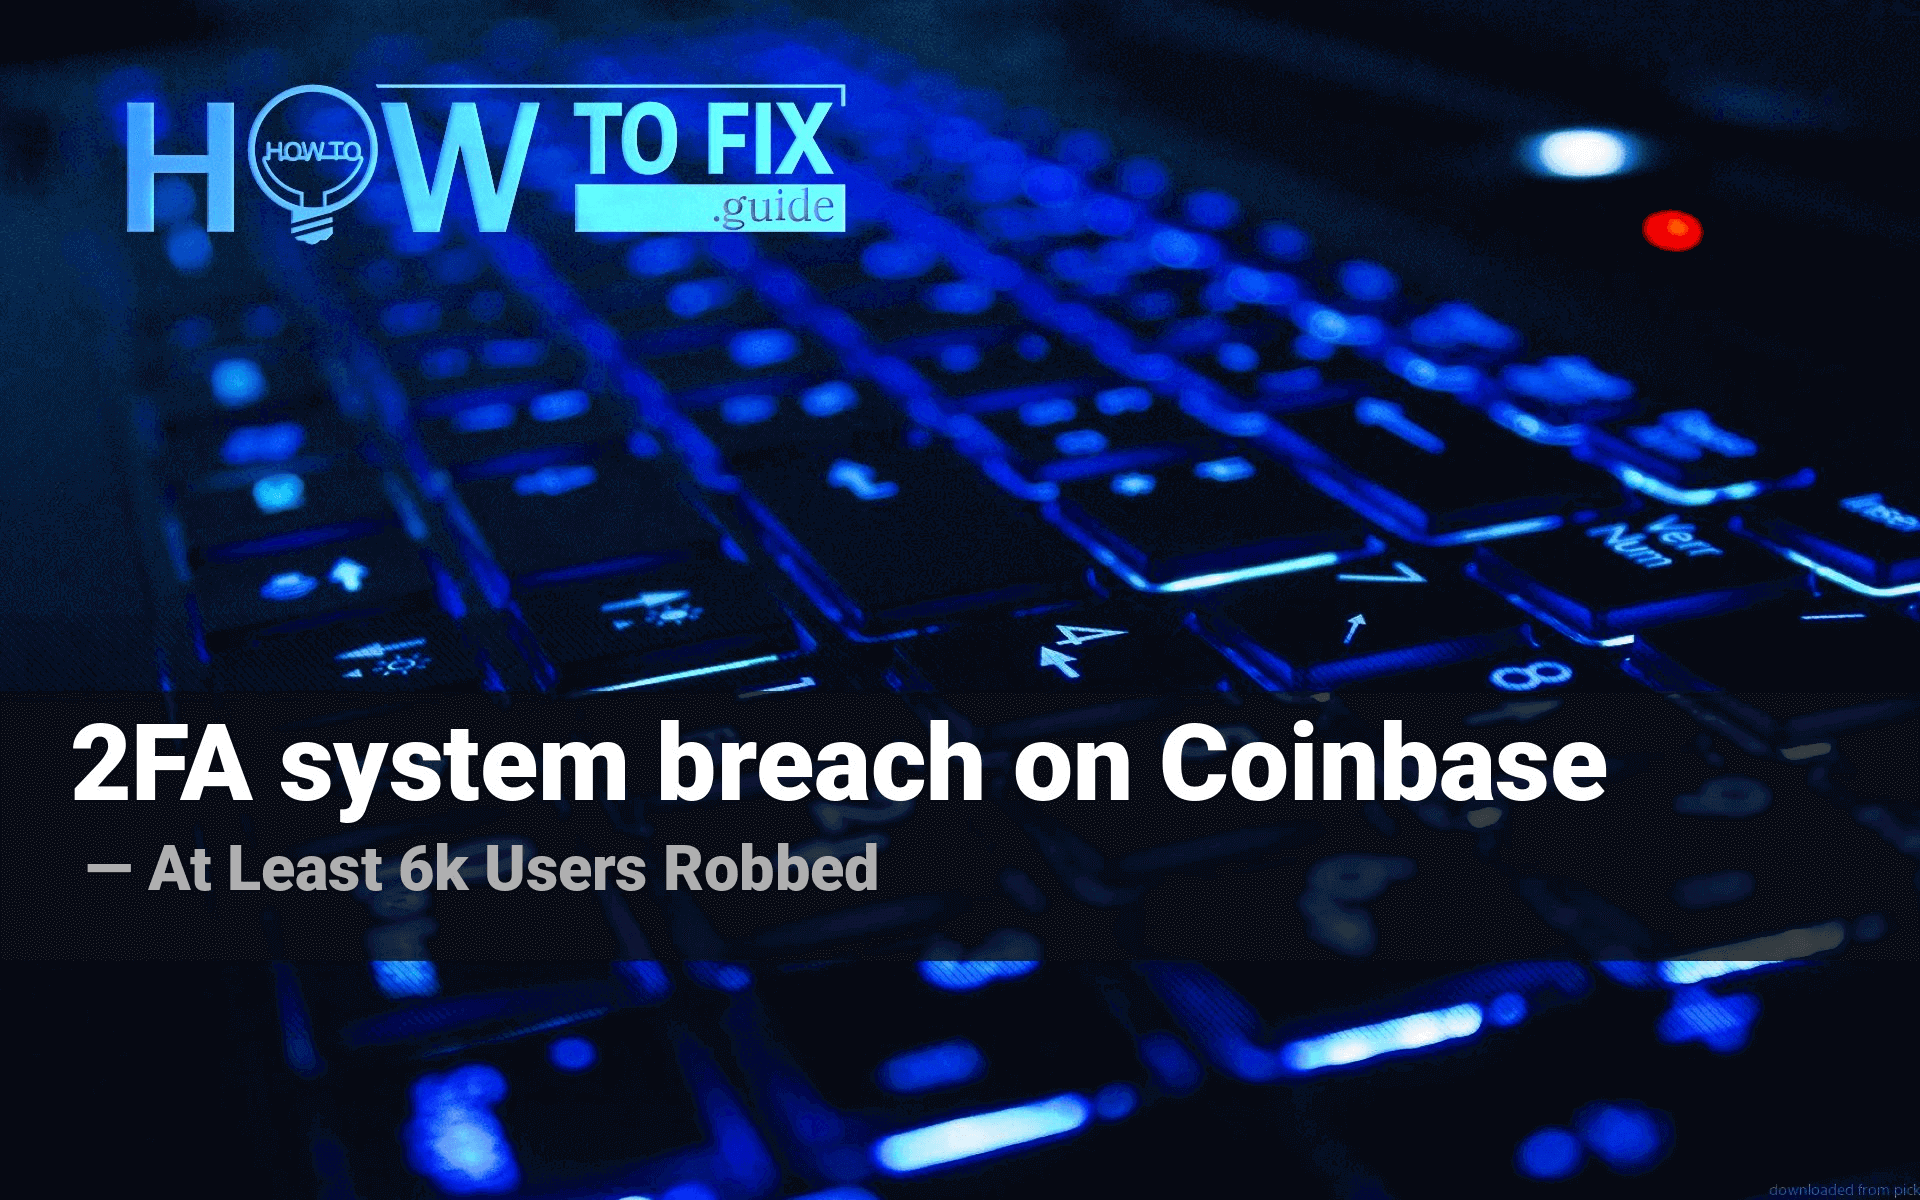 2FA system breach on Coinbase leaves at least 6 thousand users robbed